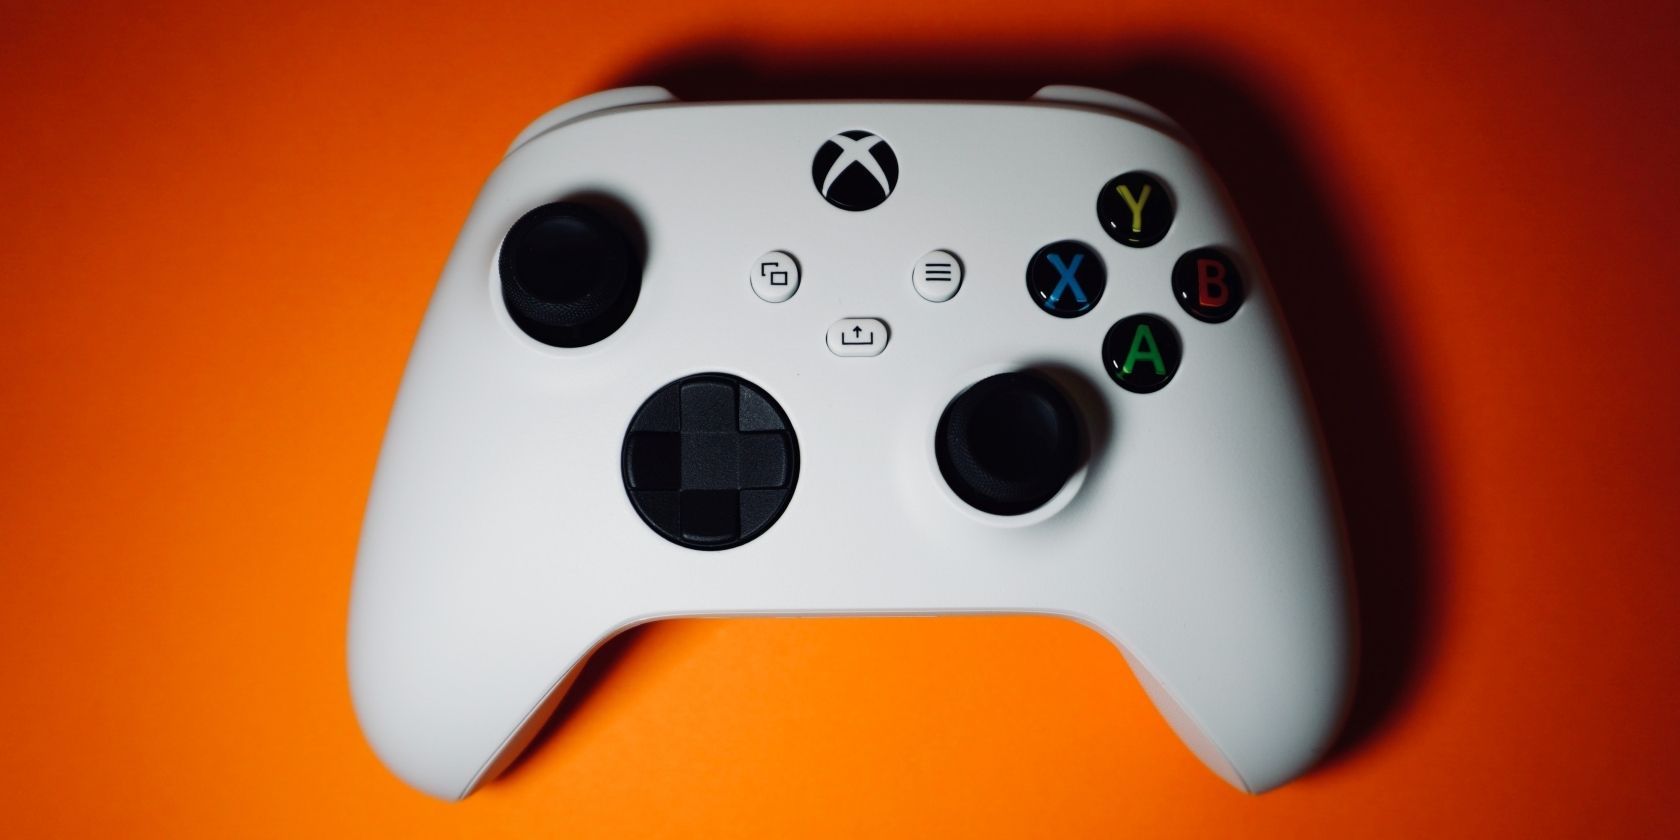 How to Link Your Social Accounts on Xbox